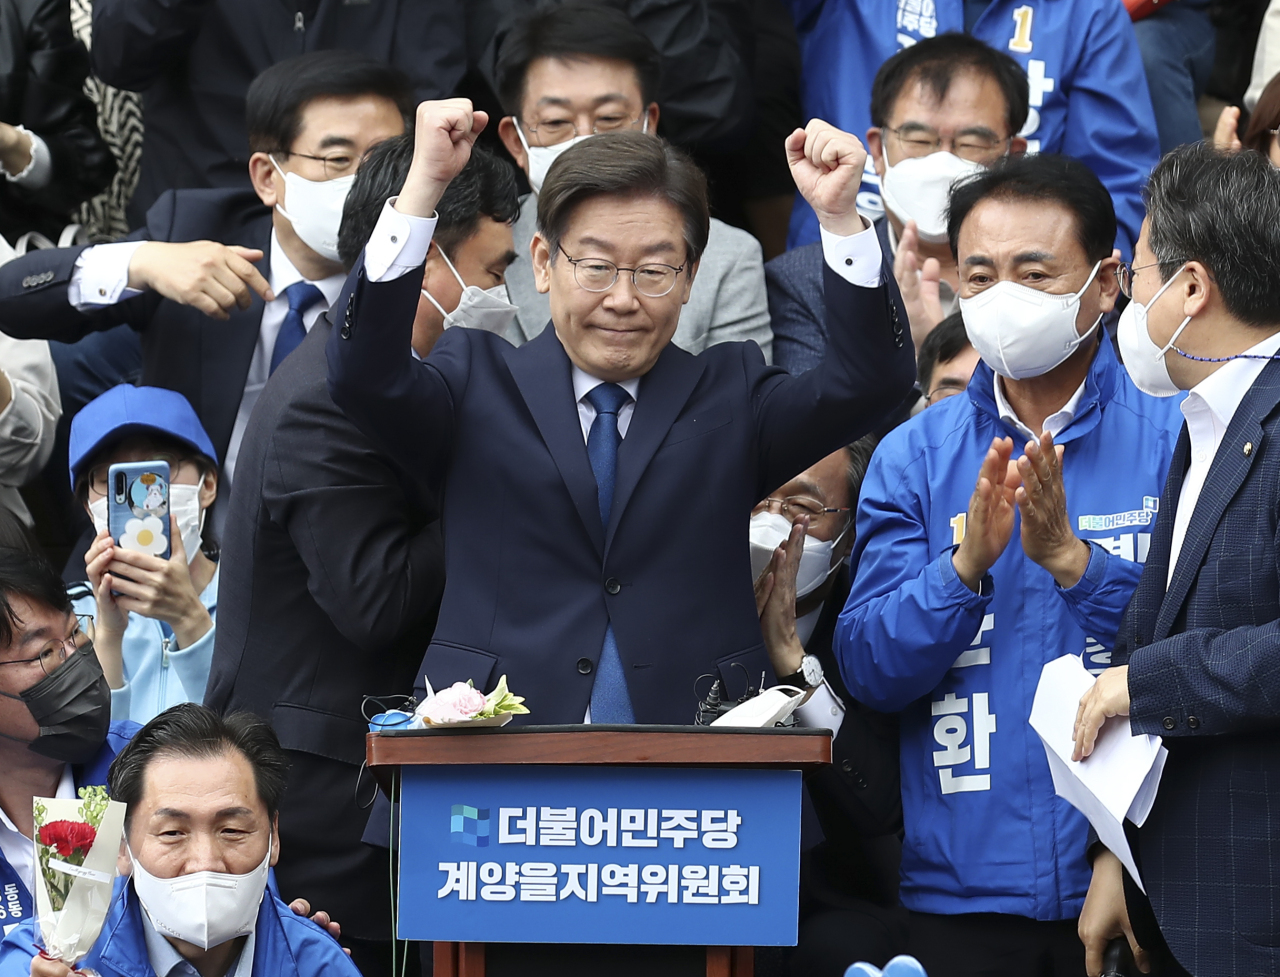 Former Gyeonggi Province Gov. Lee Jae-myung greets his supporters during a press conference held Sunday in Incheon for Lee to officially announce his bid to run in the parliamentary by-election for a constituency in Gyeyang-gu, Incheon. (Joint Press Corps)